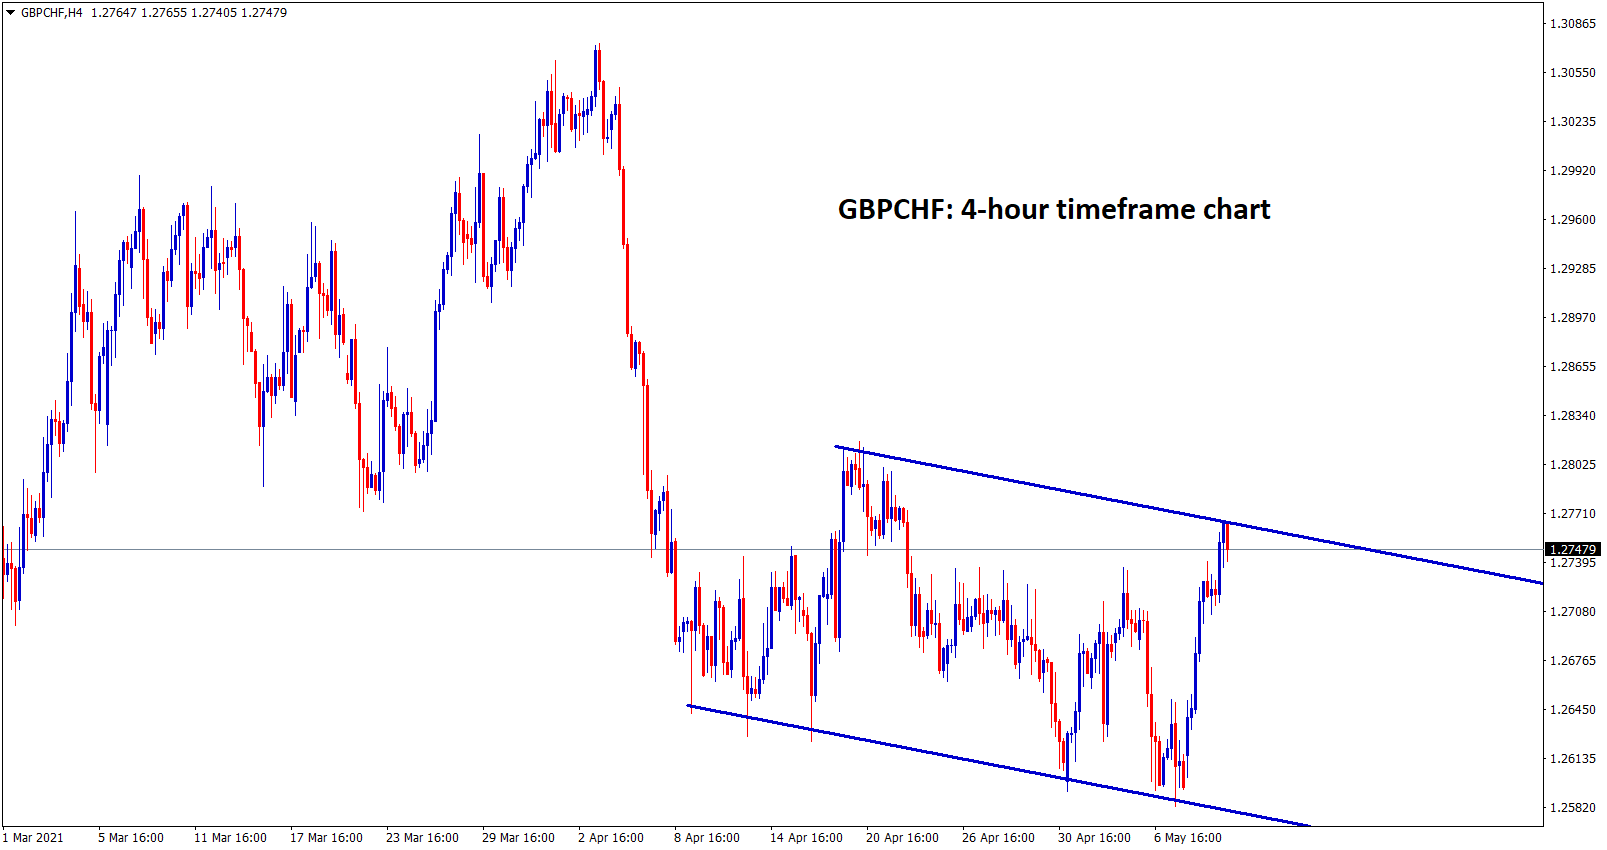 GBPCHF is also ranging up and down in the 4 hour timeframe chart